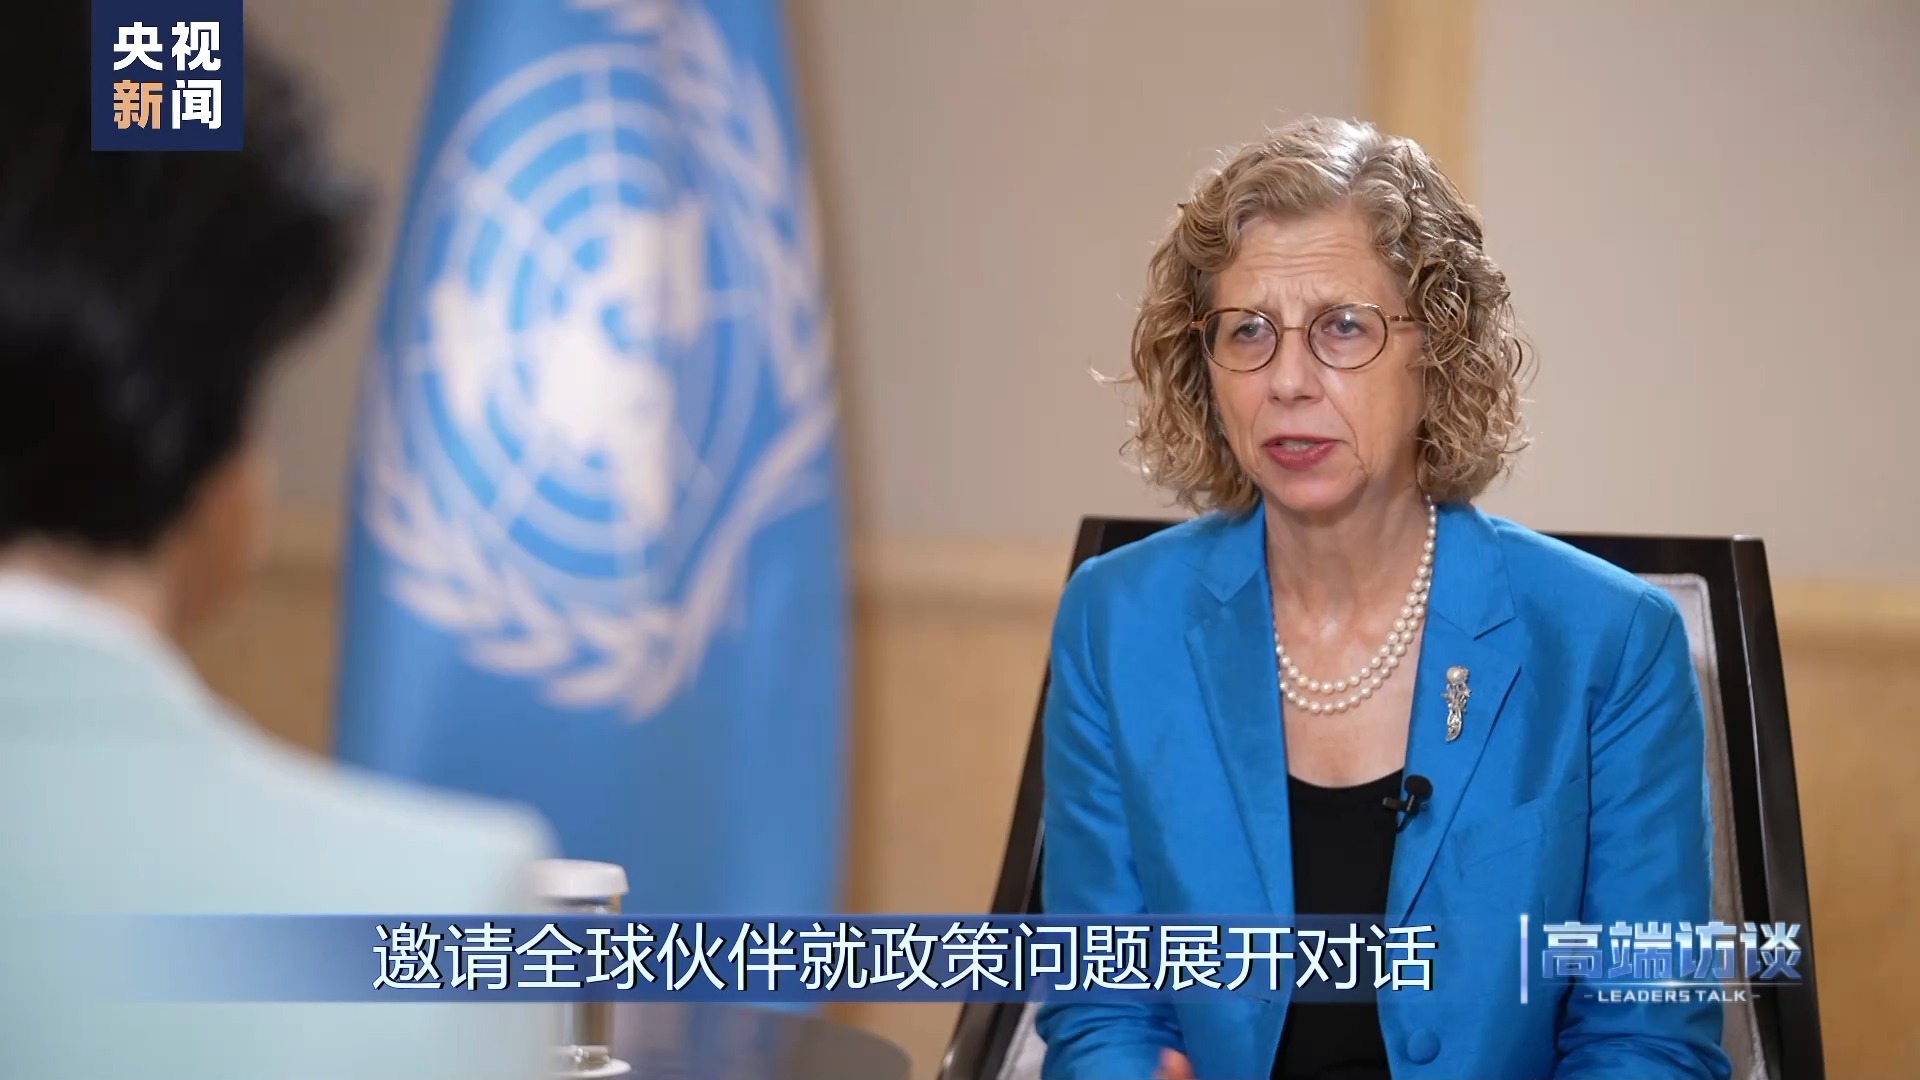 Multilateralism is the only way out! CCTV questions whether there are concerns about nuclear contaminated water being discharged into the sea. Interview with the Executive Director of the United Nations Environment Programme: Addressing Climate Change